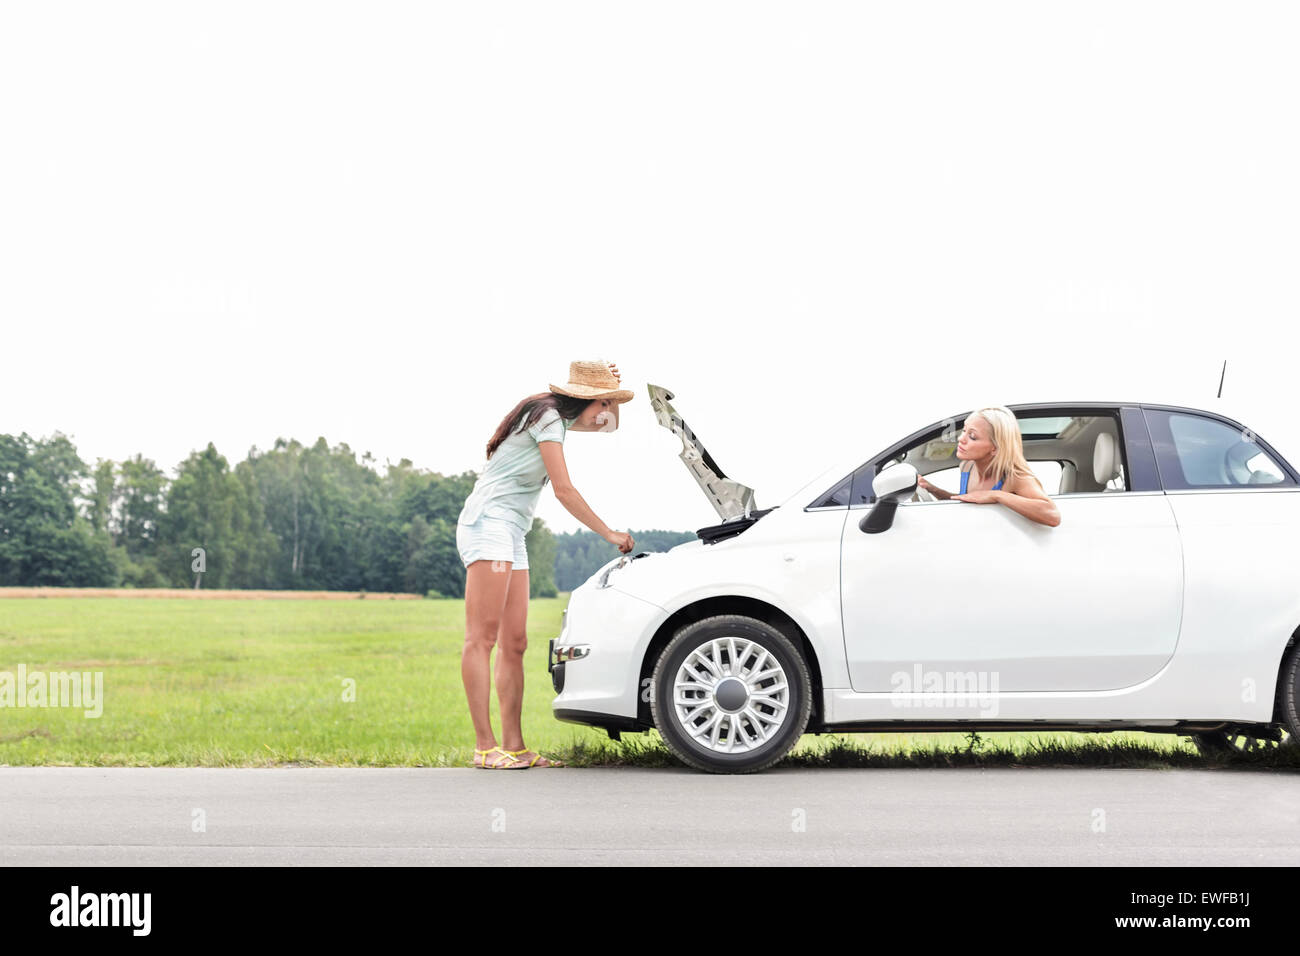 Woman looking at friend repairing broken down car on country road Stock Photo